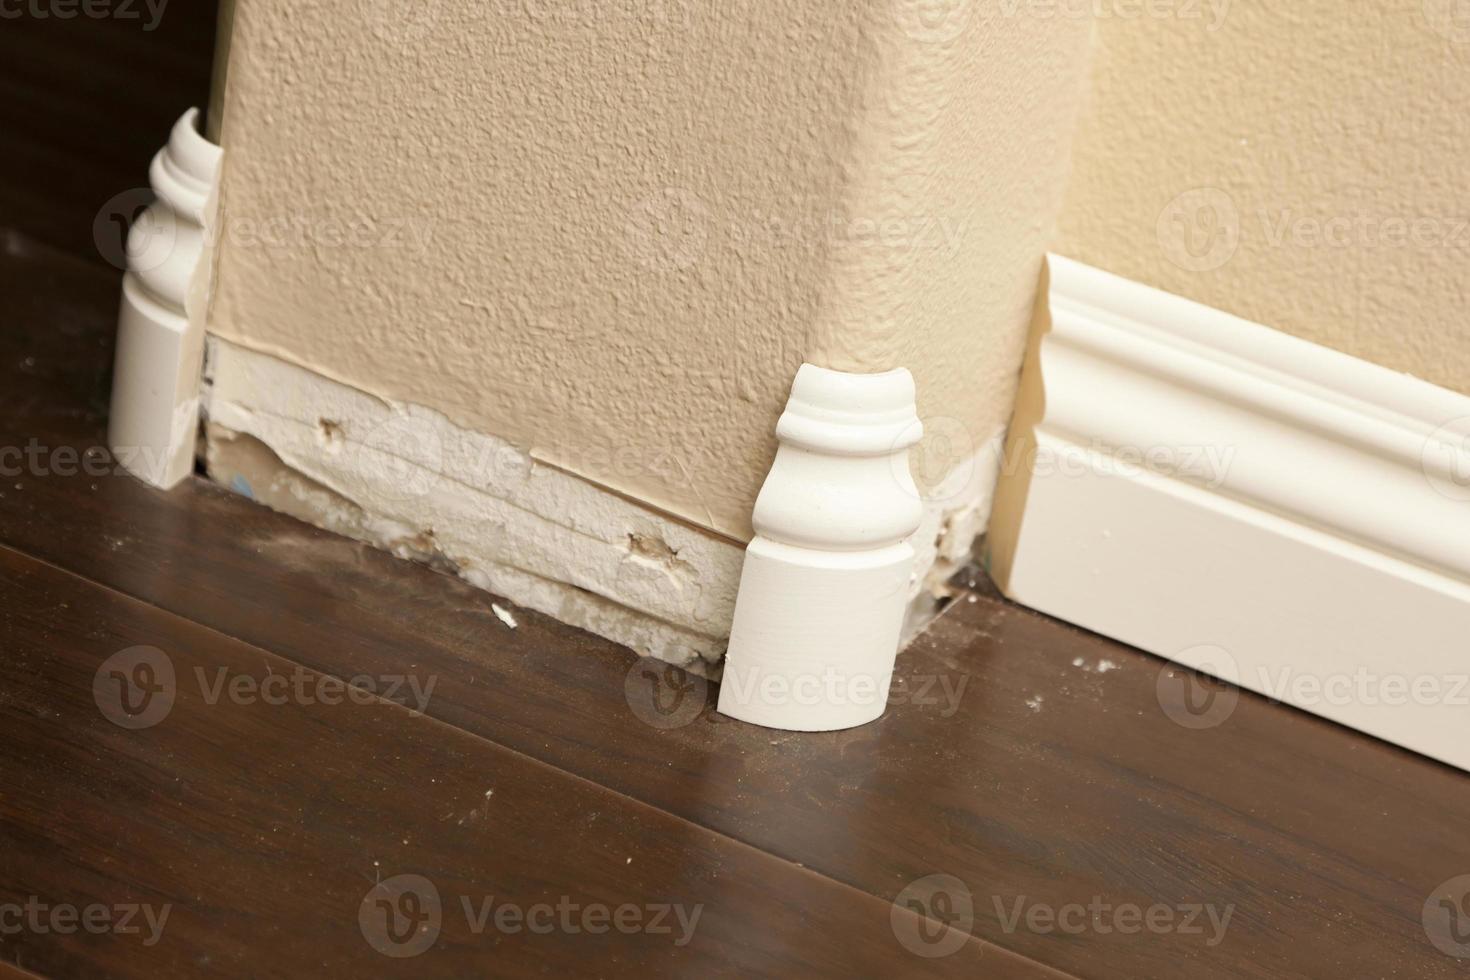 New Baseboard and Bull Nose Corners with Laminate Flooring photo